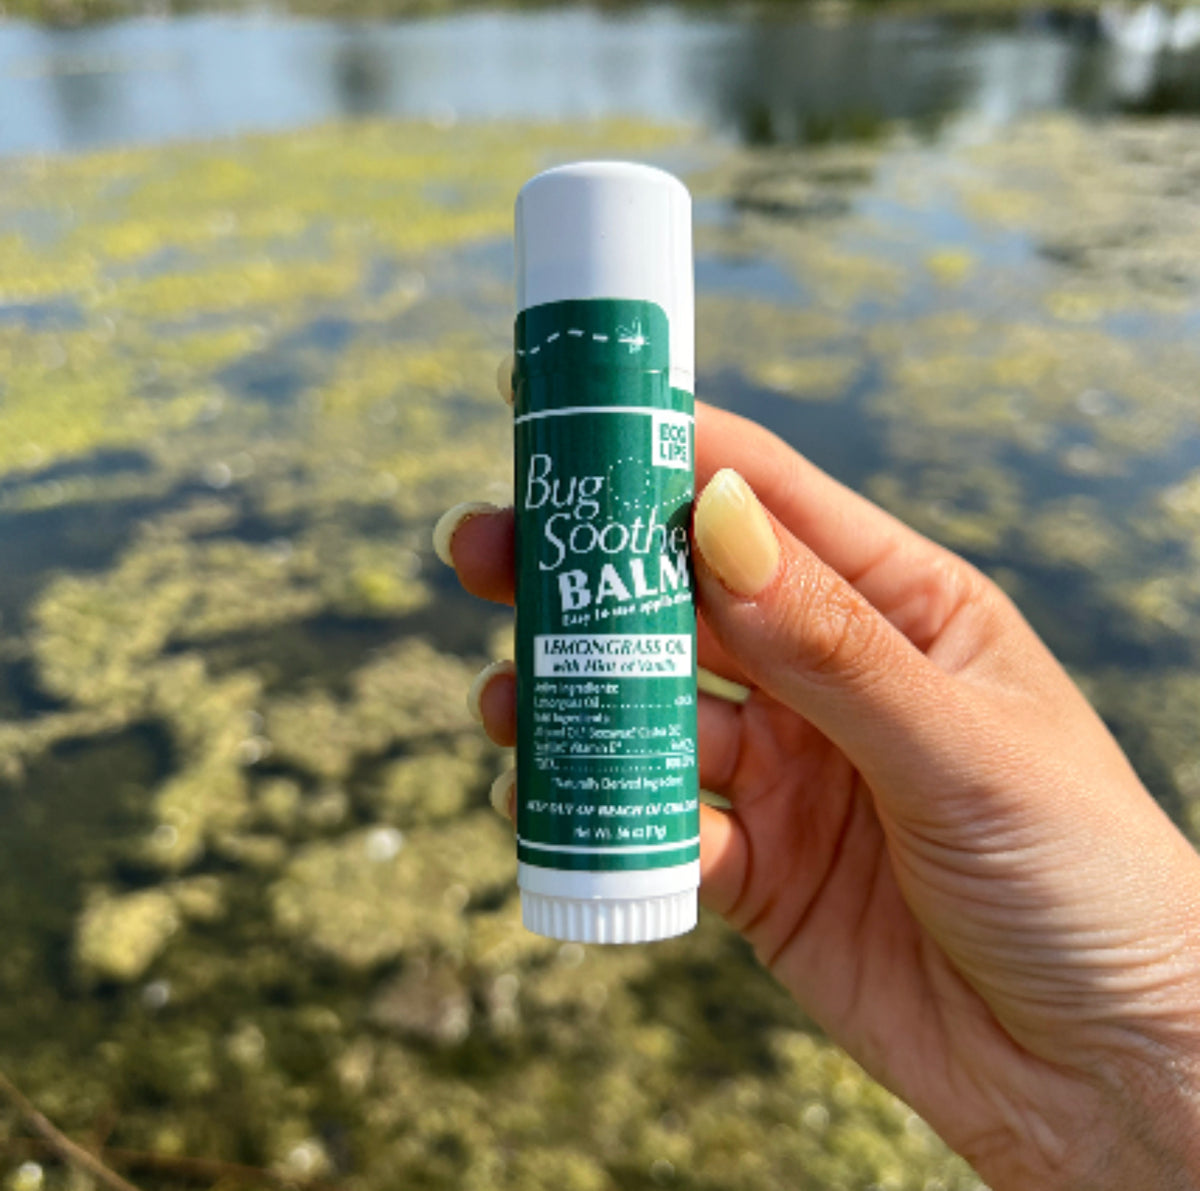 Bug Soother Natural Insect Repellent Balm 0.56 oz. 3-pack